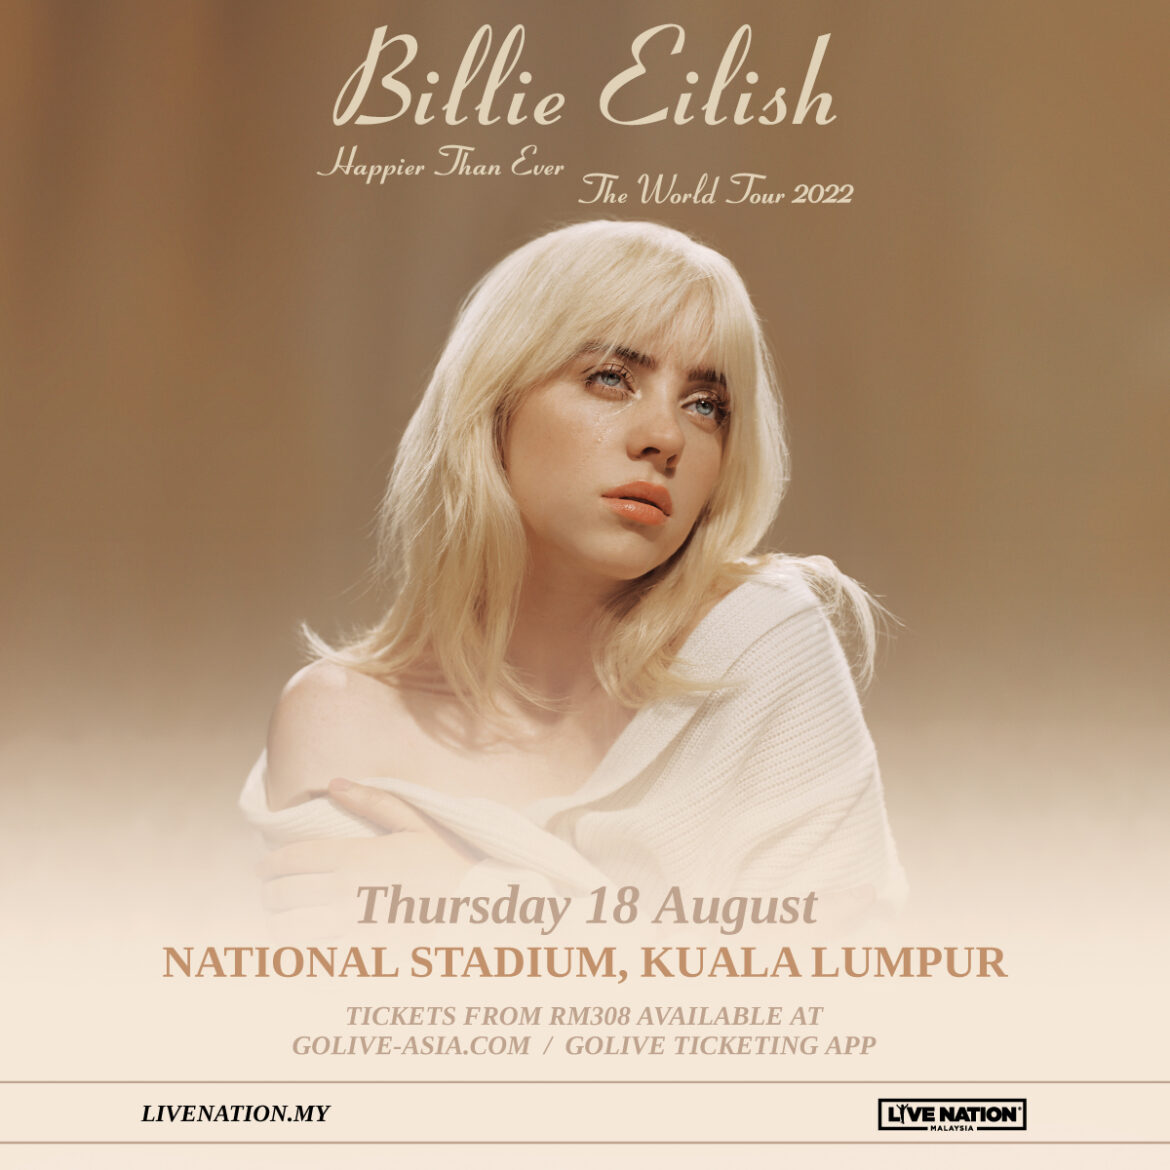 BILLIE EILISH’S LIVE CONCERT IN MALAYSIA, AUGUST 18